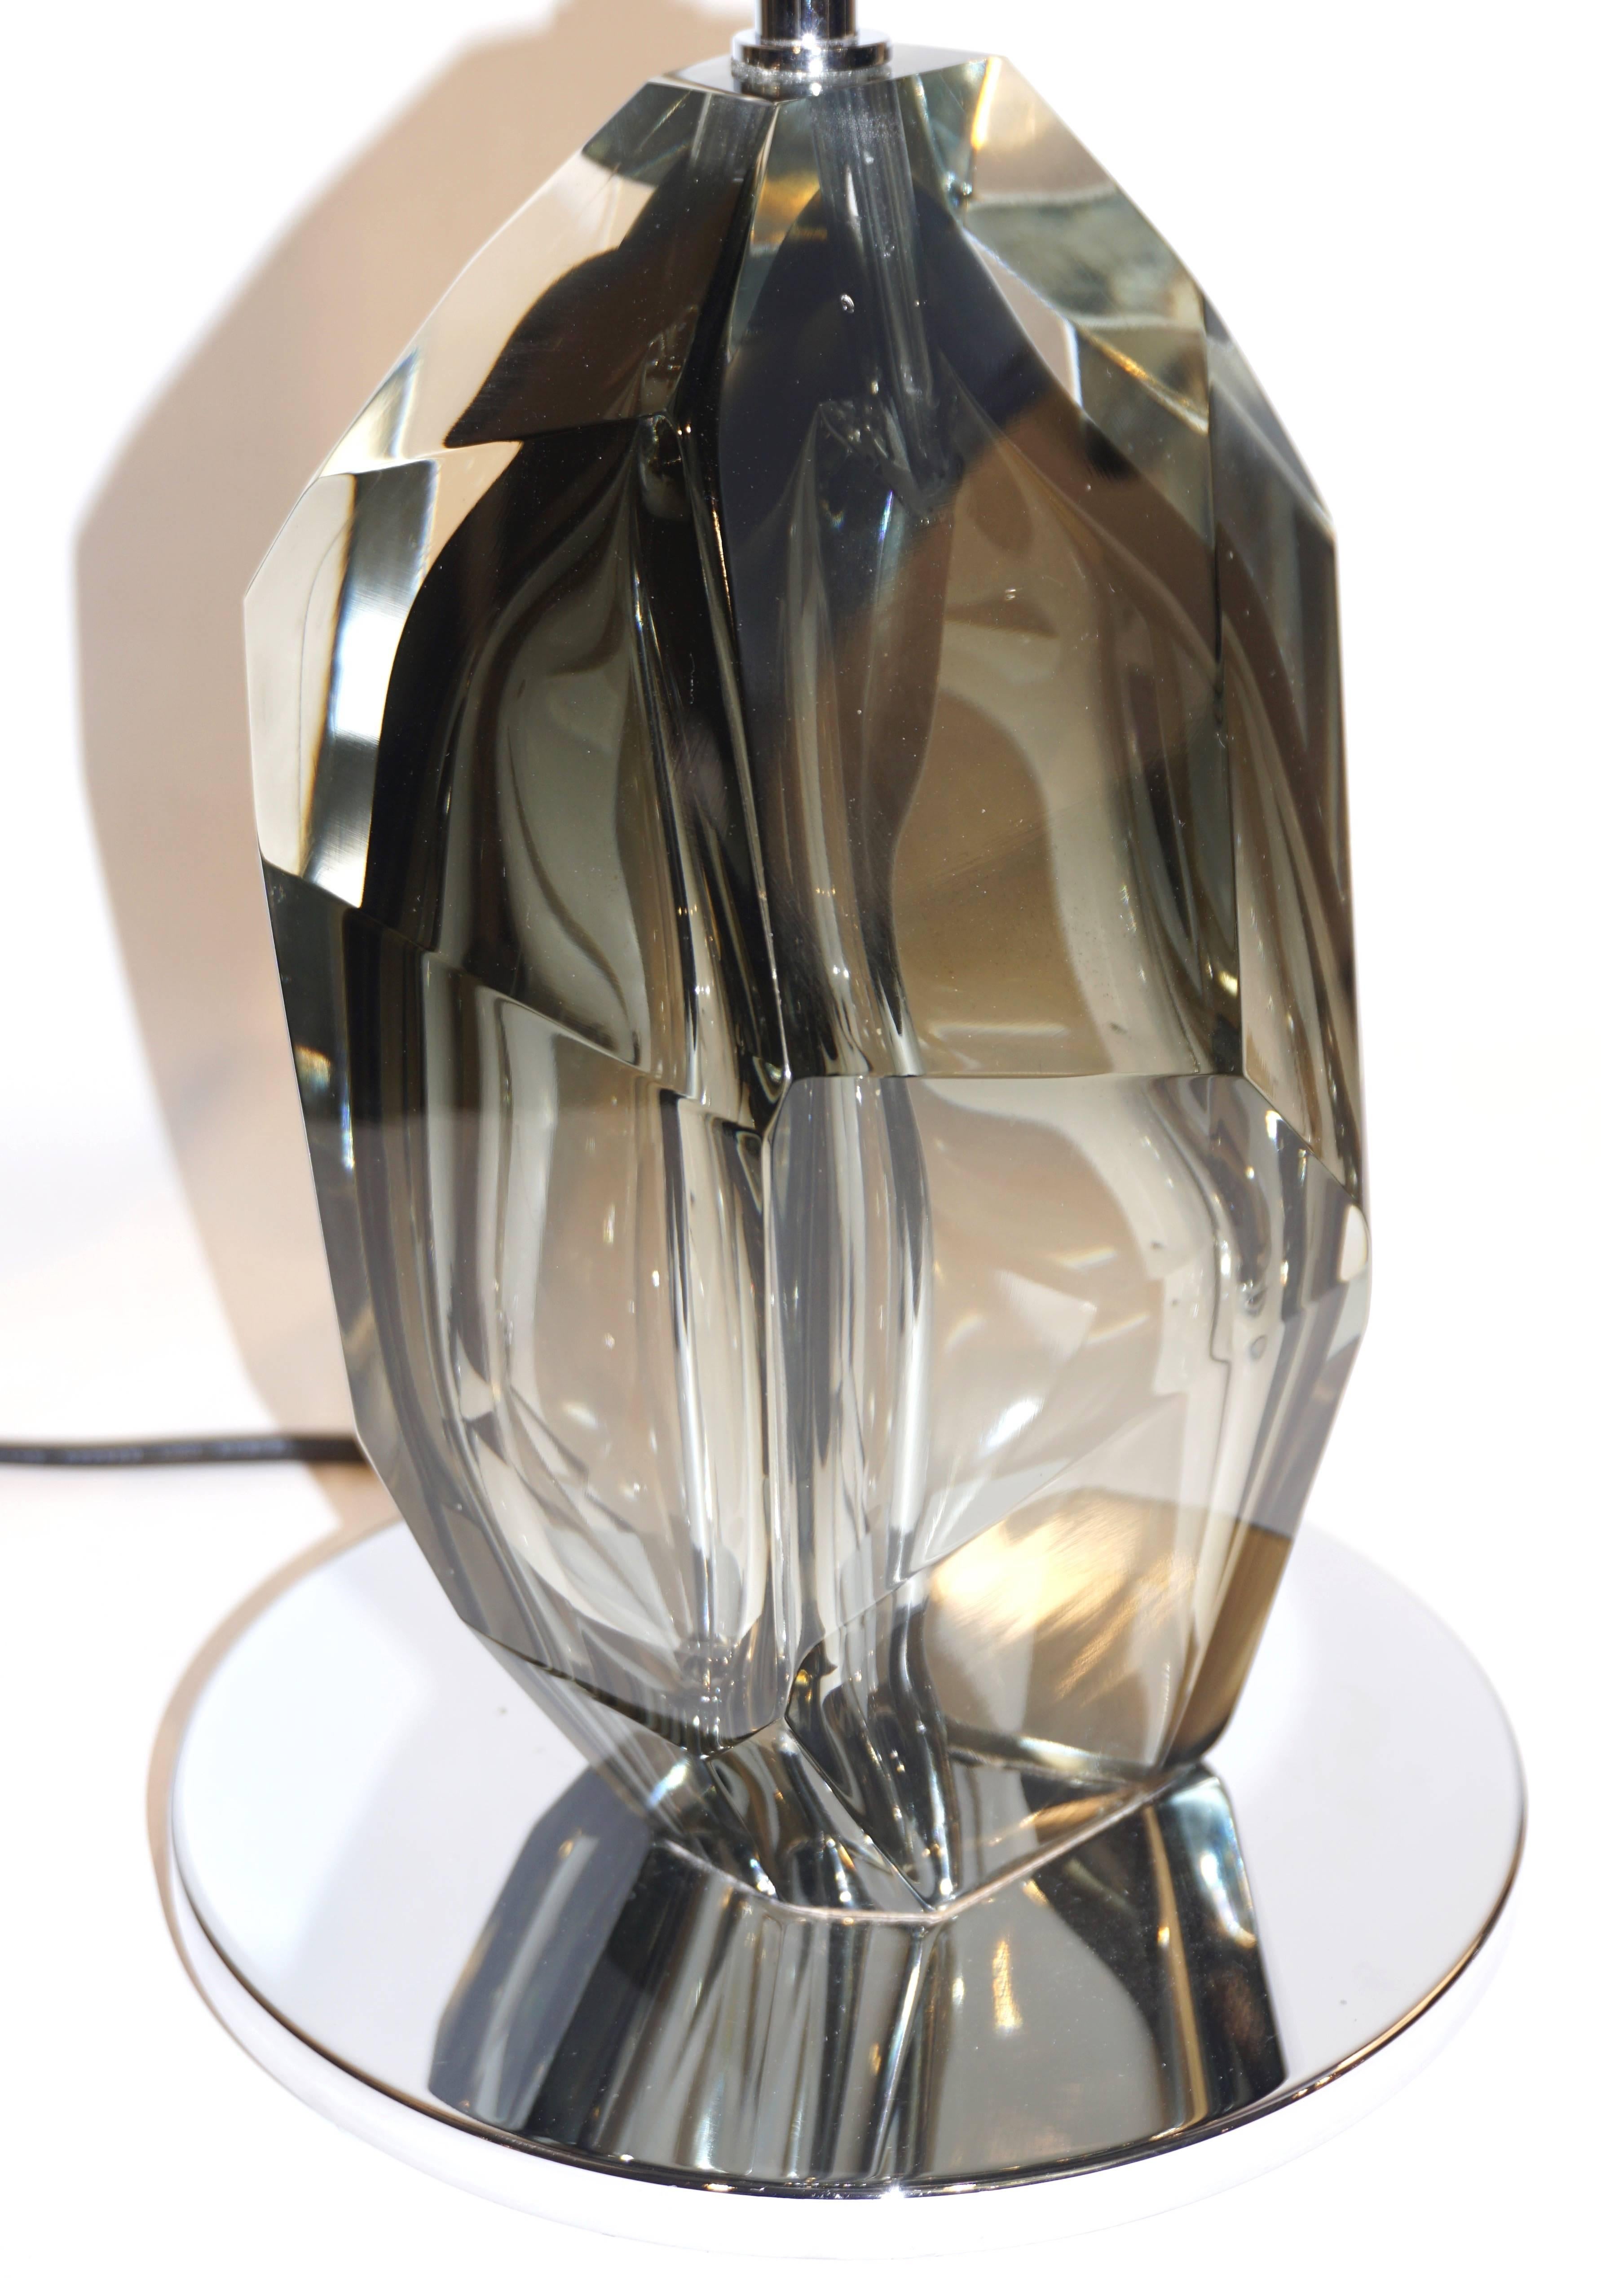 Contemporary made in Italy table lamp signed by Alberto Donà Studio of organic design, high quality of execution, entirely handcrafted and hand-polished, the heavy solid Murano glass body in a sophisticated smoked glass tint are rock crystal-shaped,